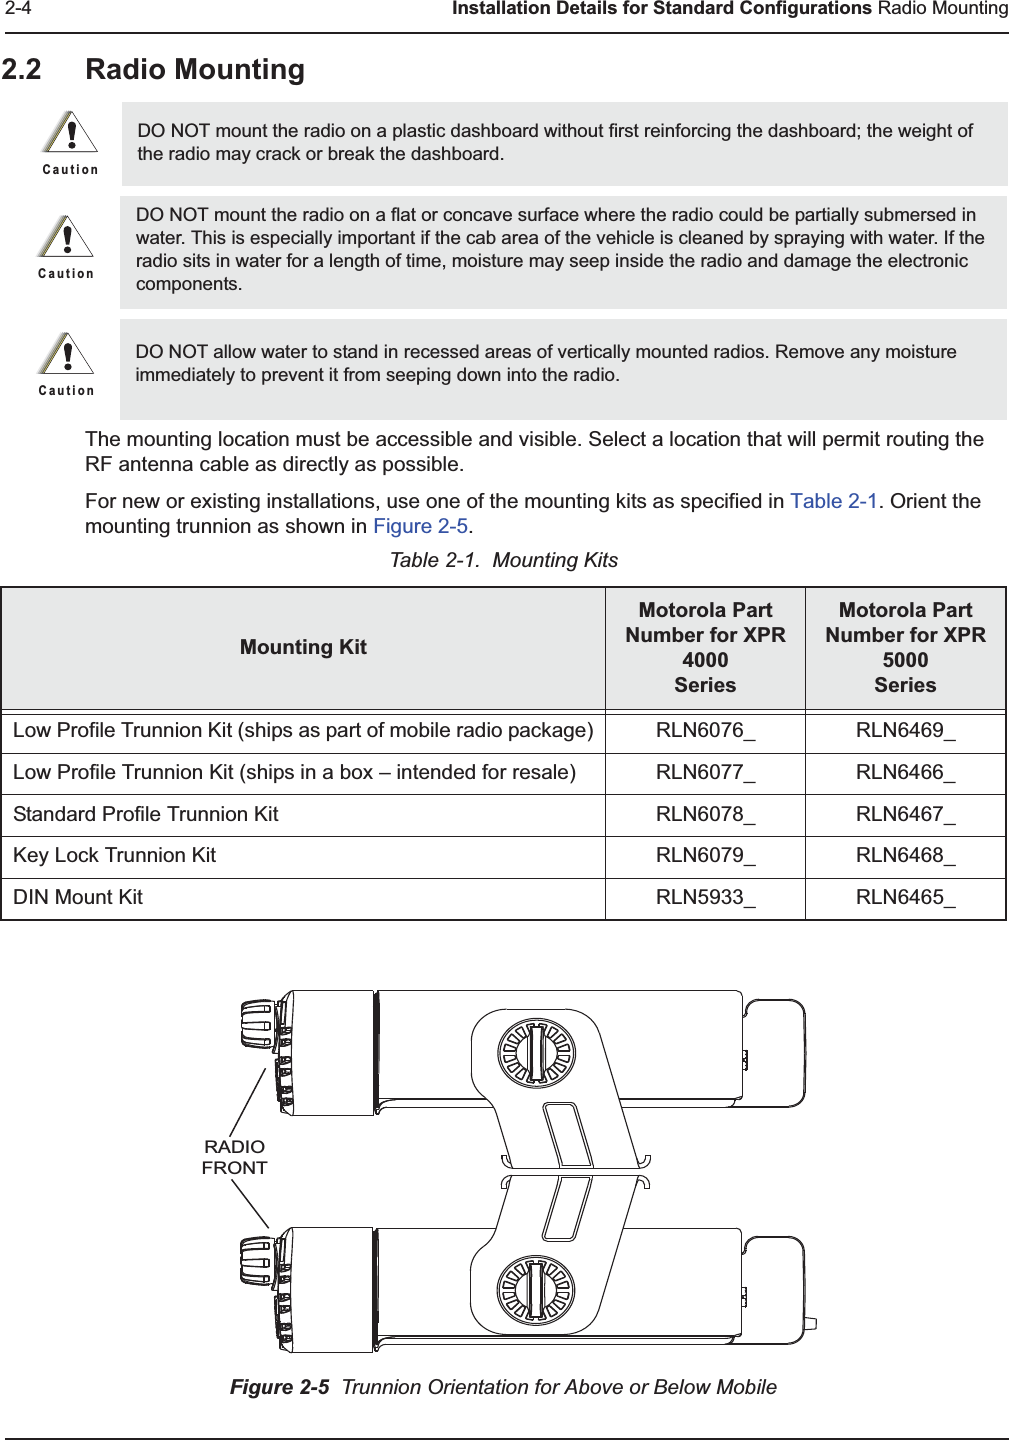 2-4 Installation Details for Standard Configurations Radio Mounting2.2 Radio Mounting  The mounting location must be accessible and visible. Select a location that will permit routing the RF antenna cable as directly as possible. For new or existing installations, use one of the mounting kits as specified in Table 2-1. Orient the mounting trunnion as shown in Figure 2-5.Figure 2-5  Trunnion Orientation for Above or Below MobileDO NOT mount the radio on a plastic dashboard without first reinforcing the dashboard; the weight of the radio may crack or break the dashboard.DO NOT mount the radio on a flat or concave surface where the radio could be partially submersed in water. This is especially important if the cab area of the vehicle is cleaned by spraying with water. If the radio sits in water for a length of time, moisture may seep inside the radio and damage the electronic components.DO NOT allow water to stand in recessed areas of vertically mounted radios. Remove any moisture immediately to prevent it from seeping down into the radio.Table 2-1.  Mounting KitsMounting KitMotorola Part Number for XPR 4000SeriesMotorola Part Number for XPR 5000SeriesLow Profile Trunnion Kit (ships as part of mobile radio package) RLN6076_ RLN6469_Low Profile Trunnion Kit (ships in a box – intended for resale) RLN6077_ RLN6466_Standard Profile Trunnion Kit RLN6078_ RLN6467_Key Lock Trunnion Kit RLN6079_ RLN6468_DIN Mount Kit RLN5933_ RLN6465_C a u t i o nC a u t i o nC a u t i o nRADIOFRONT